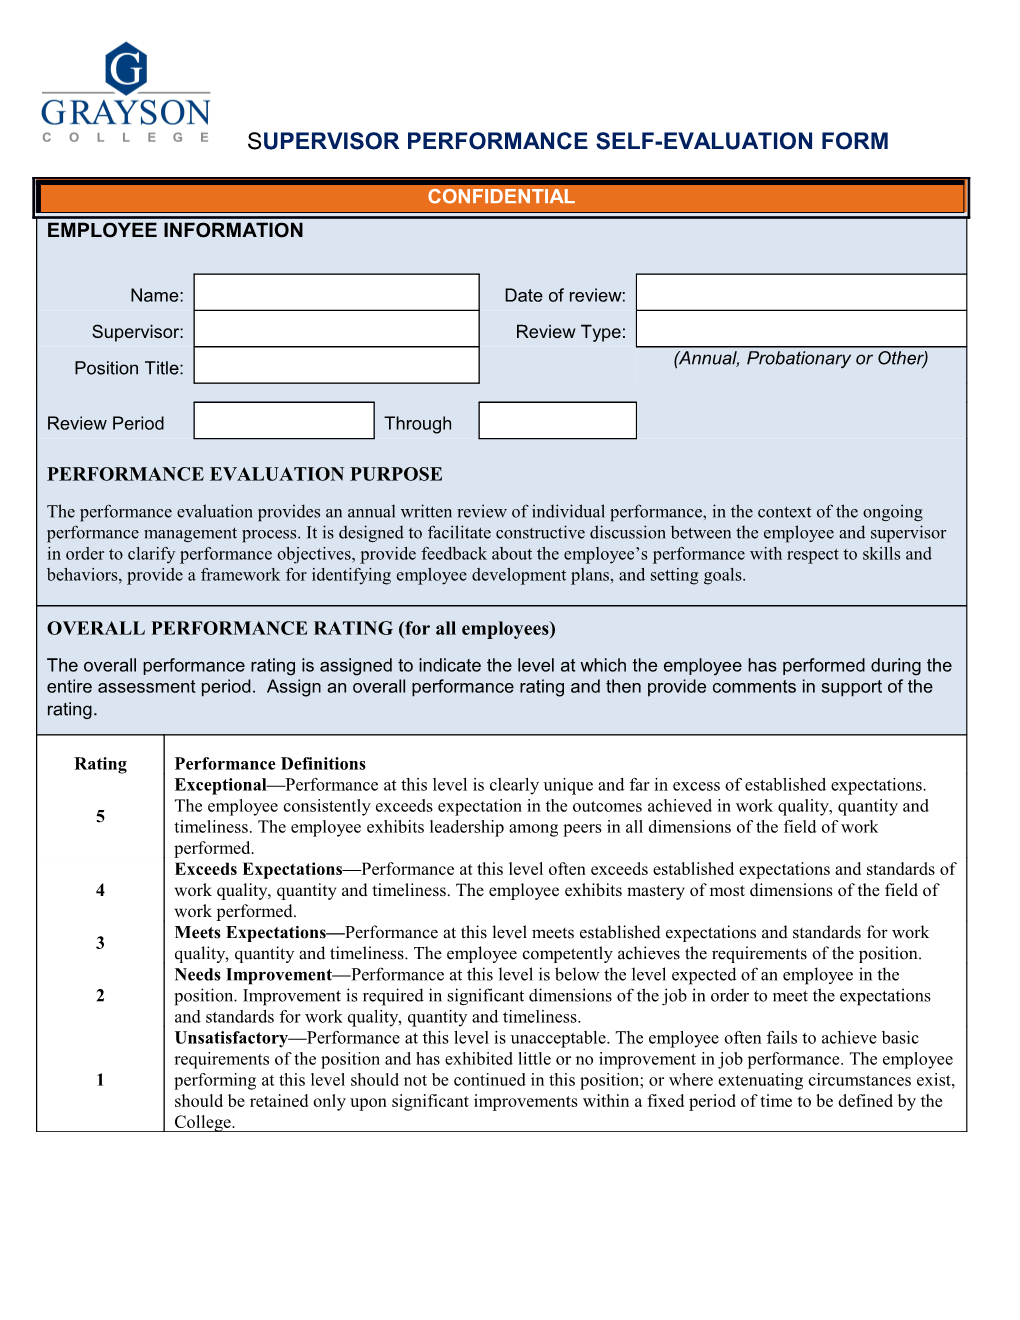 Non-Faculty Exempt Staff Performance Review Confidential